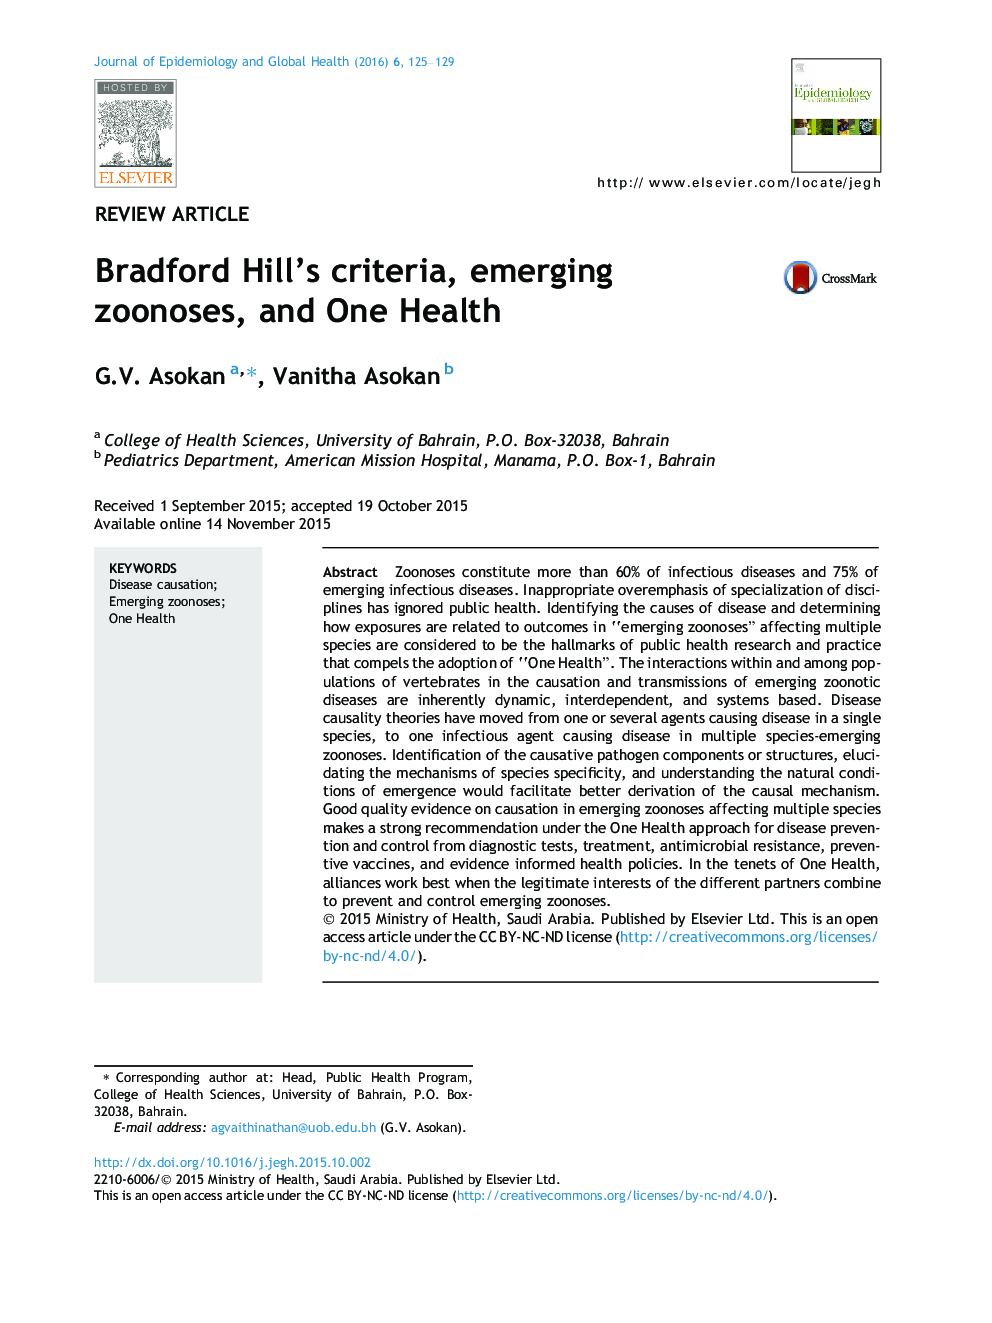 Bradford Hill’s criteria, emerging zoonoses, and One Health